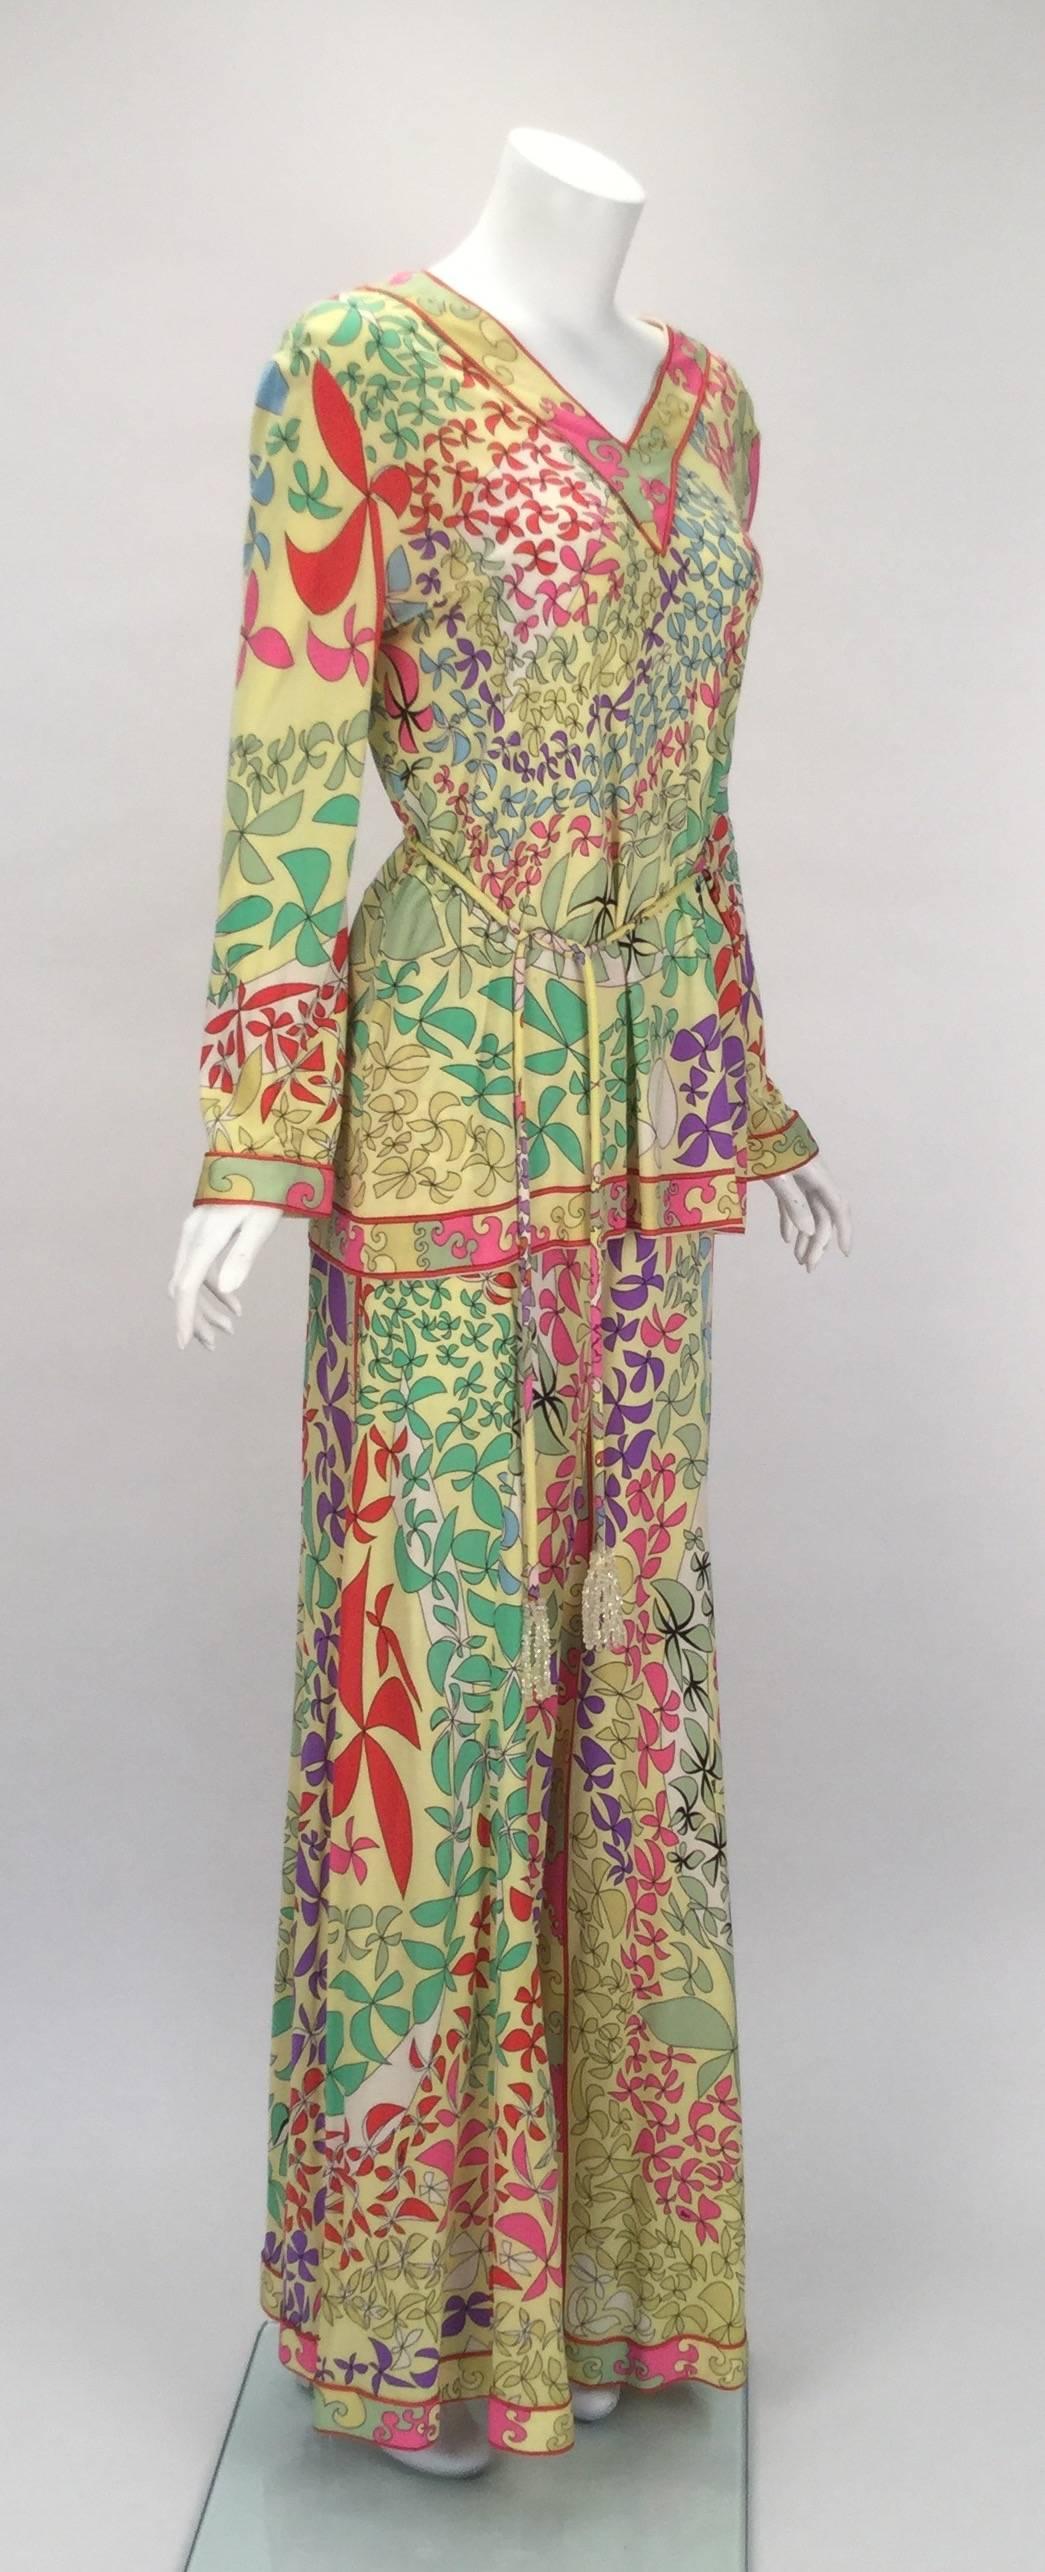 From Pucci to her own design room, Averardo Bessi designed this absolutely amazing 1970's vibrant multicolored, abstract floral print four piece ensemble. All pieces are printed with her designer's signature fabric, which is also signed with the